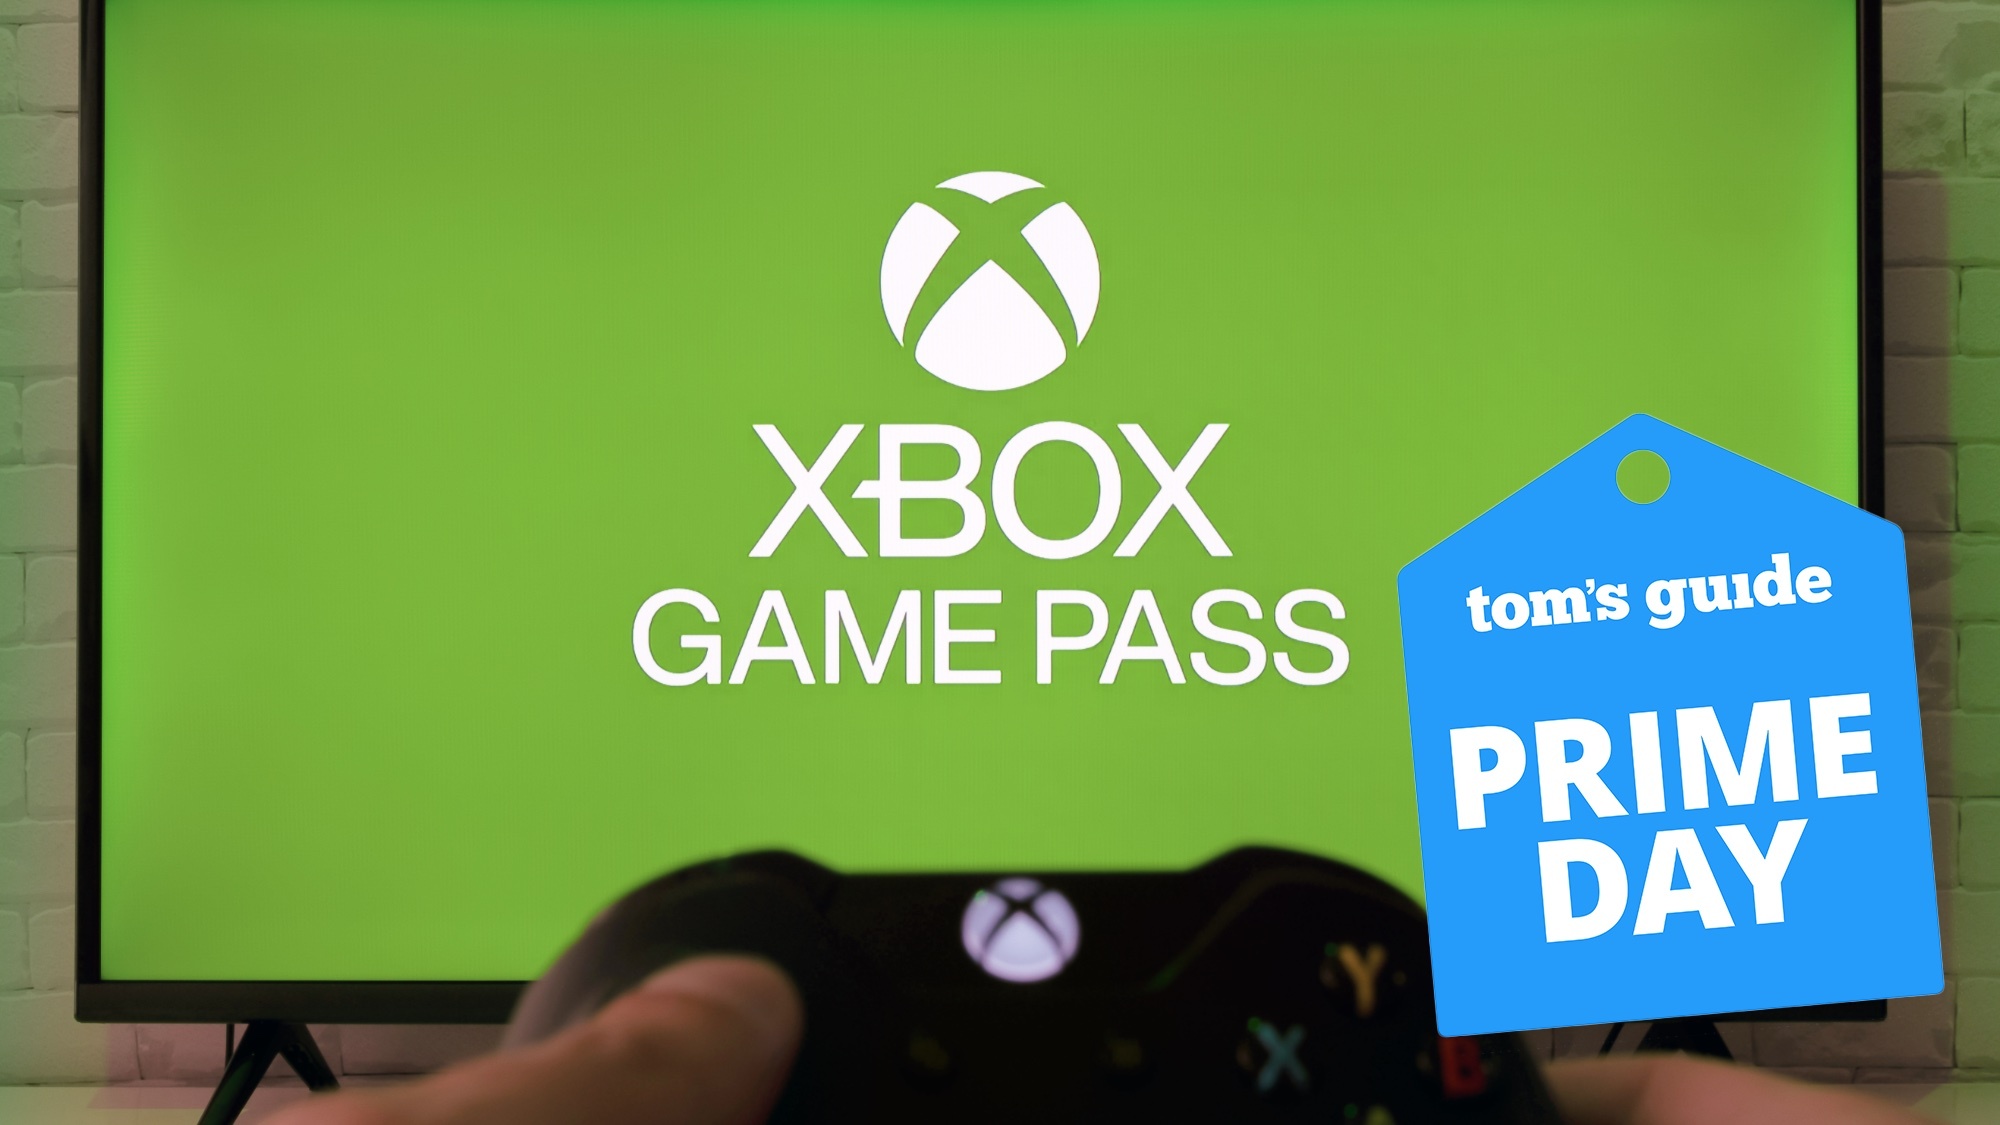 Xbox Game Pass: how to subscribe, price, and perks - Polygon